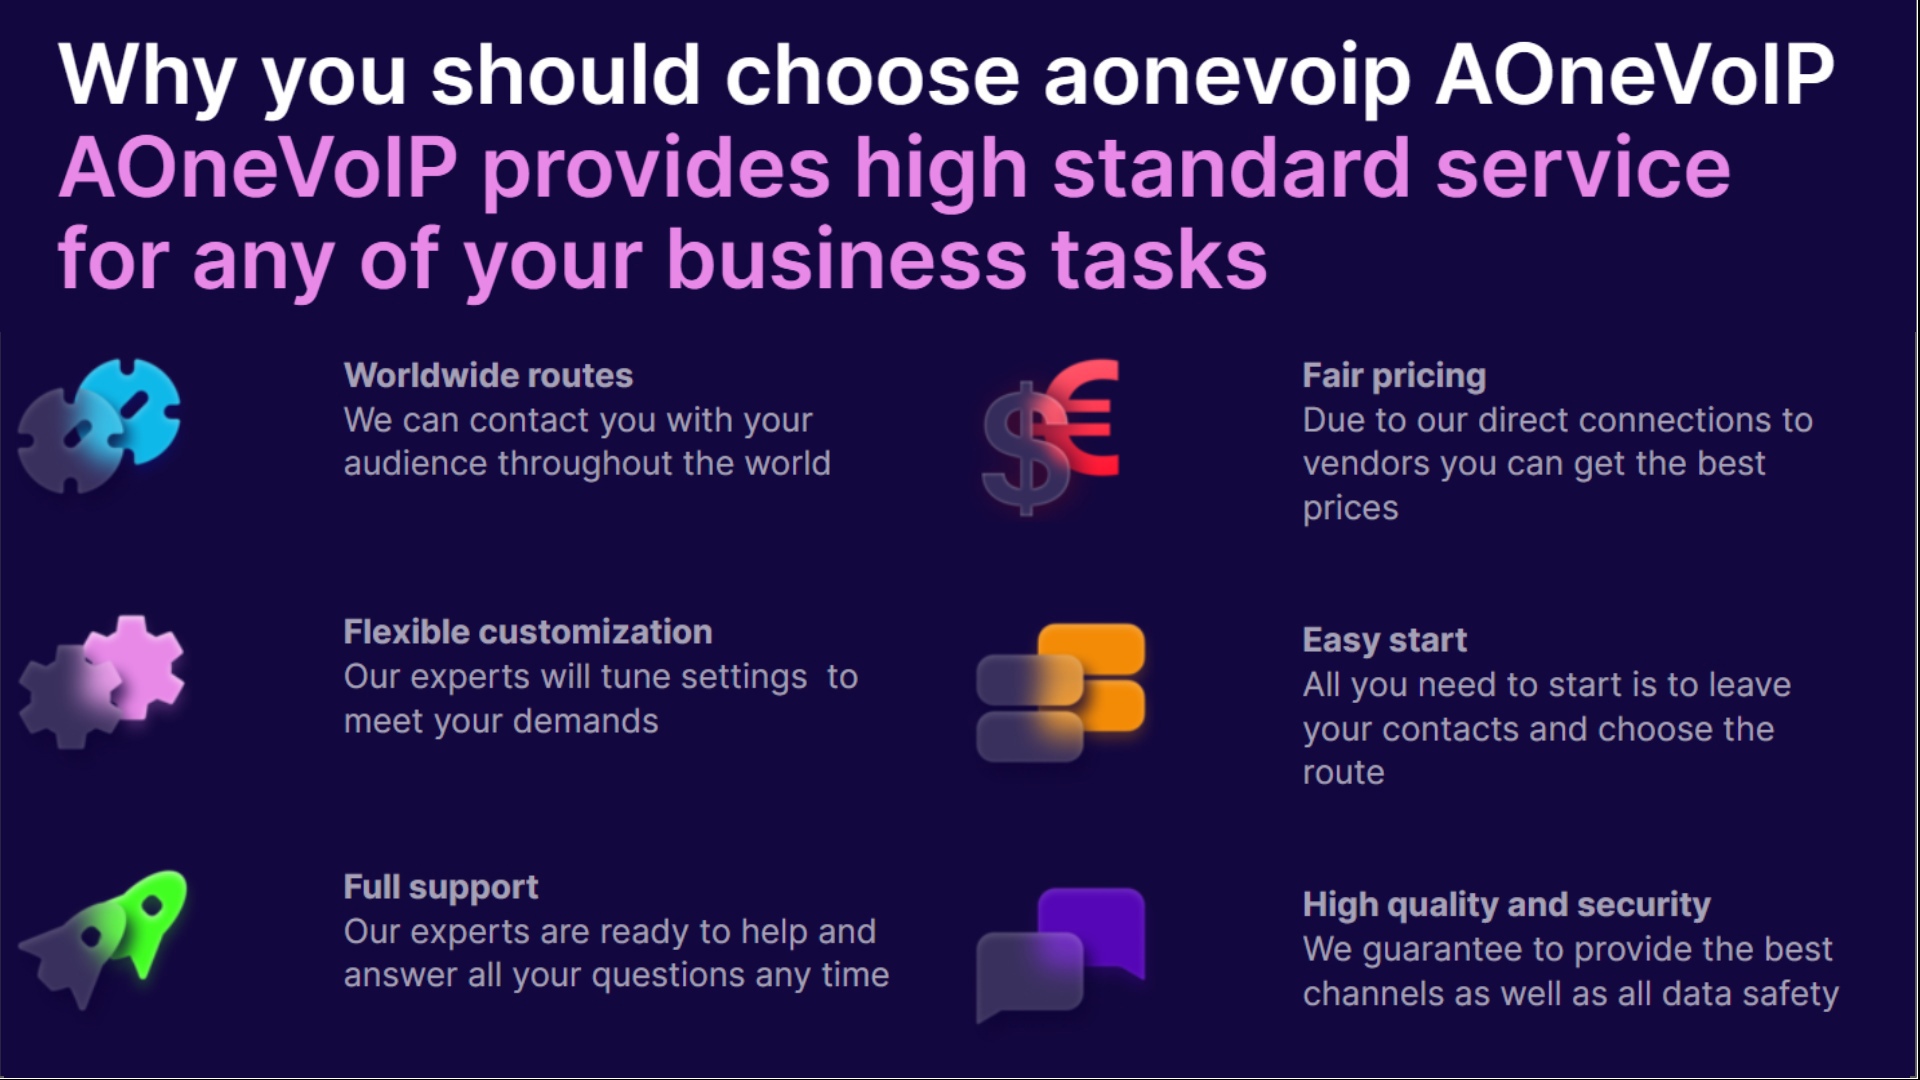 Why you should choose aonevoip AOneVolP
AOneVolP provides high standard service

for any of your business tasks

2
LL
4

Worldwide routes
We can contact you with your
audience throughout the world

Flexible customization
Our experts will tune settings to
meet your demands

Full support
Our experts are ready to help and
answer all your questions any time

LT TT

Due to our direct connections to
vendors you can get the best
[o]g[el=H

[IES Ea

All you need to start is to leave
your contacts and choose the
(JV 5}

High quality and security
We guarantee to provide the best
channels as well as all data safety